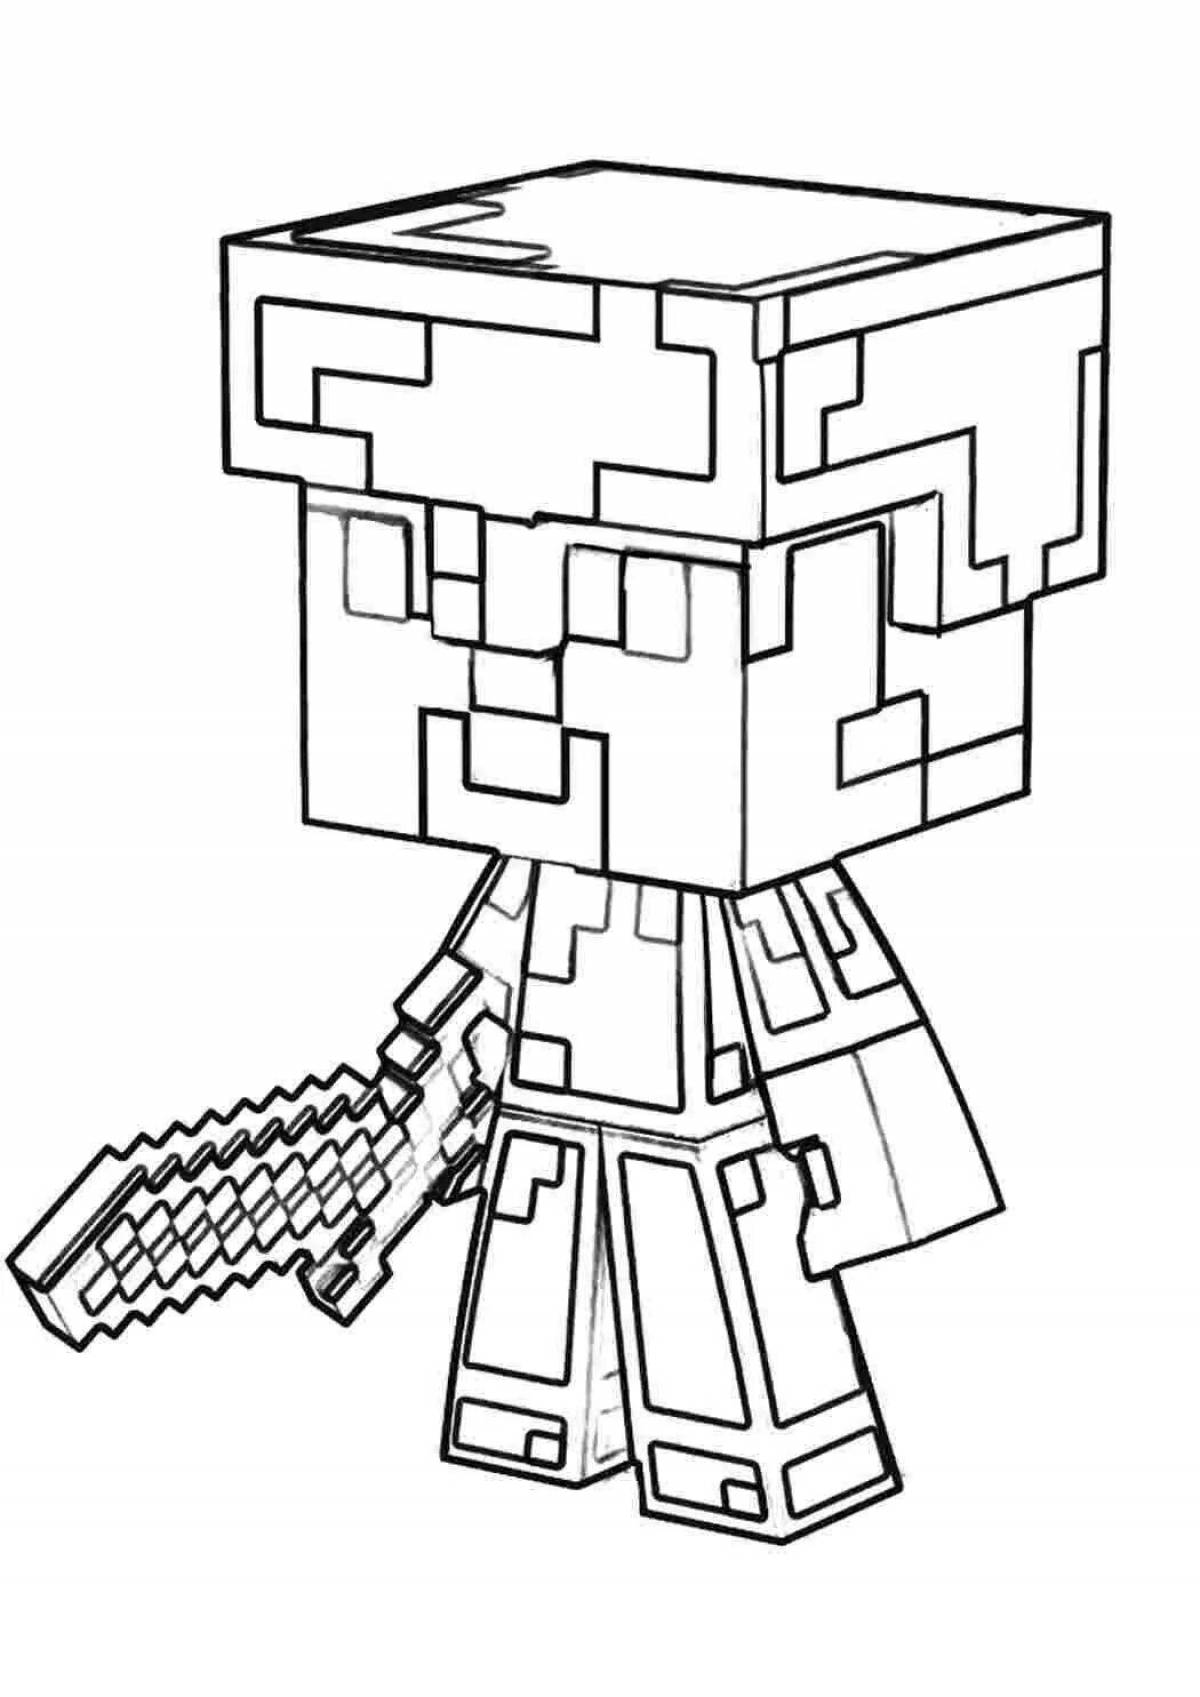 Creative minecraft dots coloring page